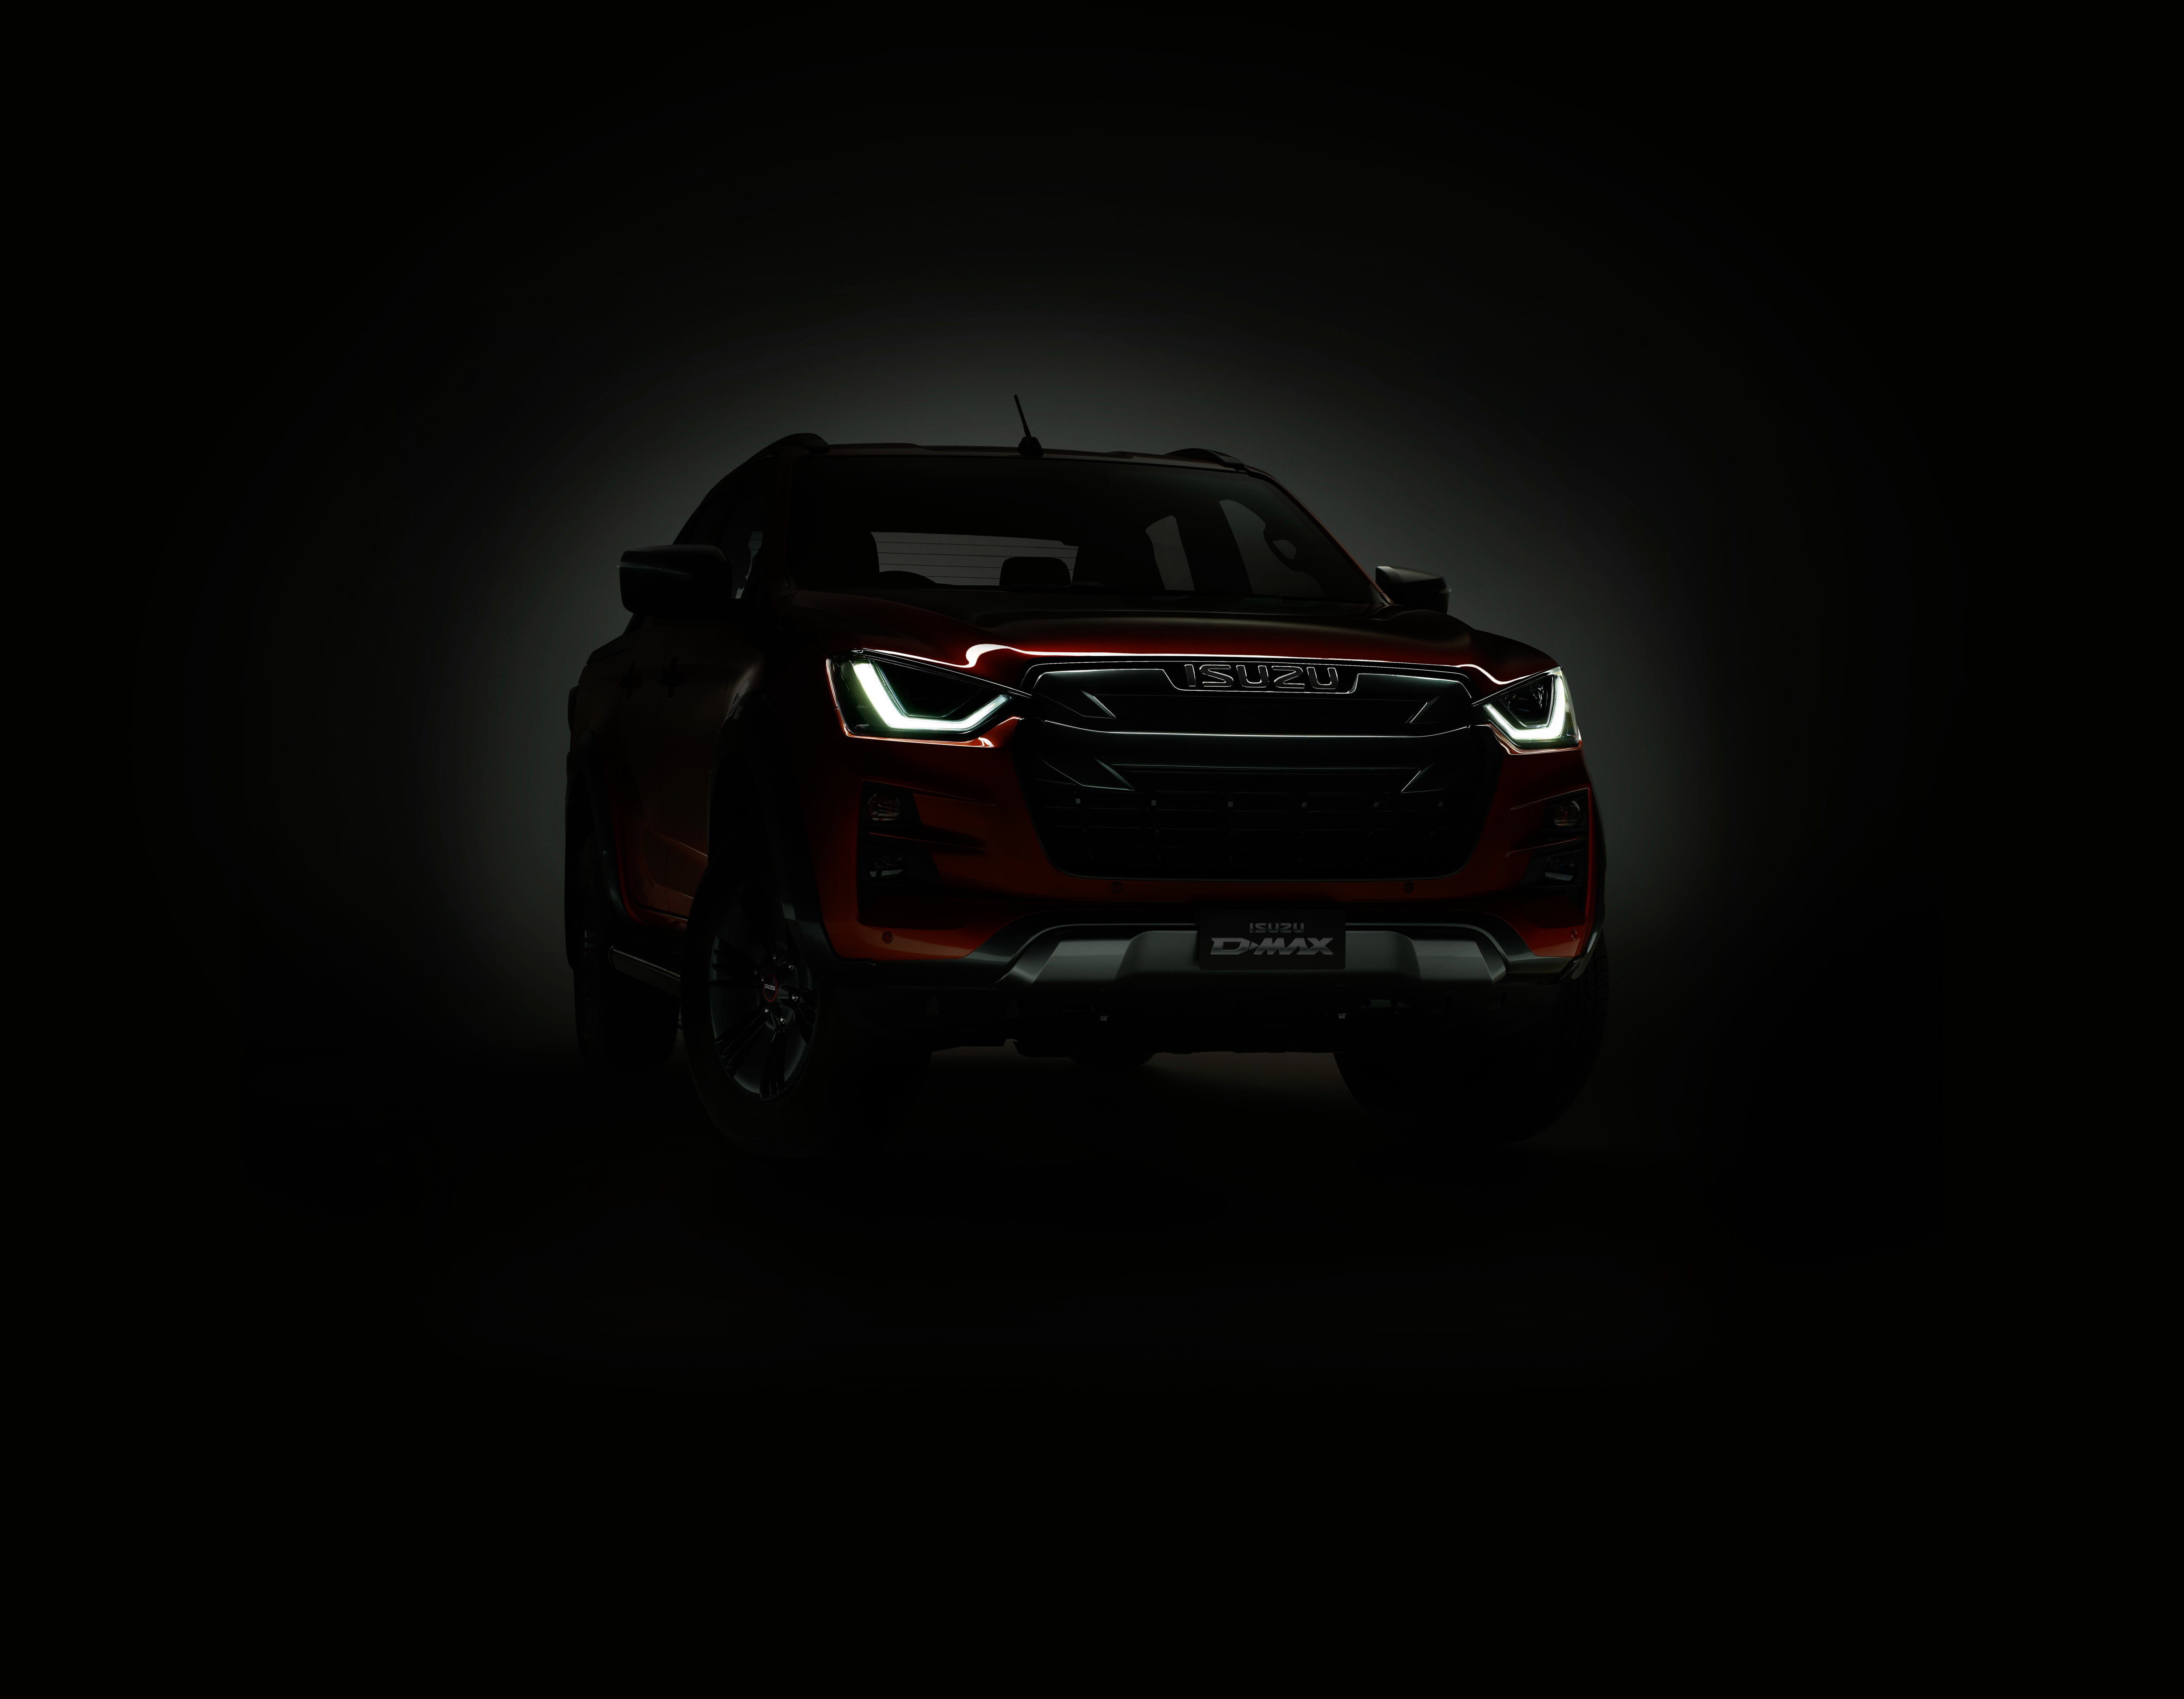 Australian-spec D-Max to be reveal on the 13th of August 2020, via an online public launch.